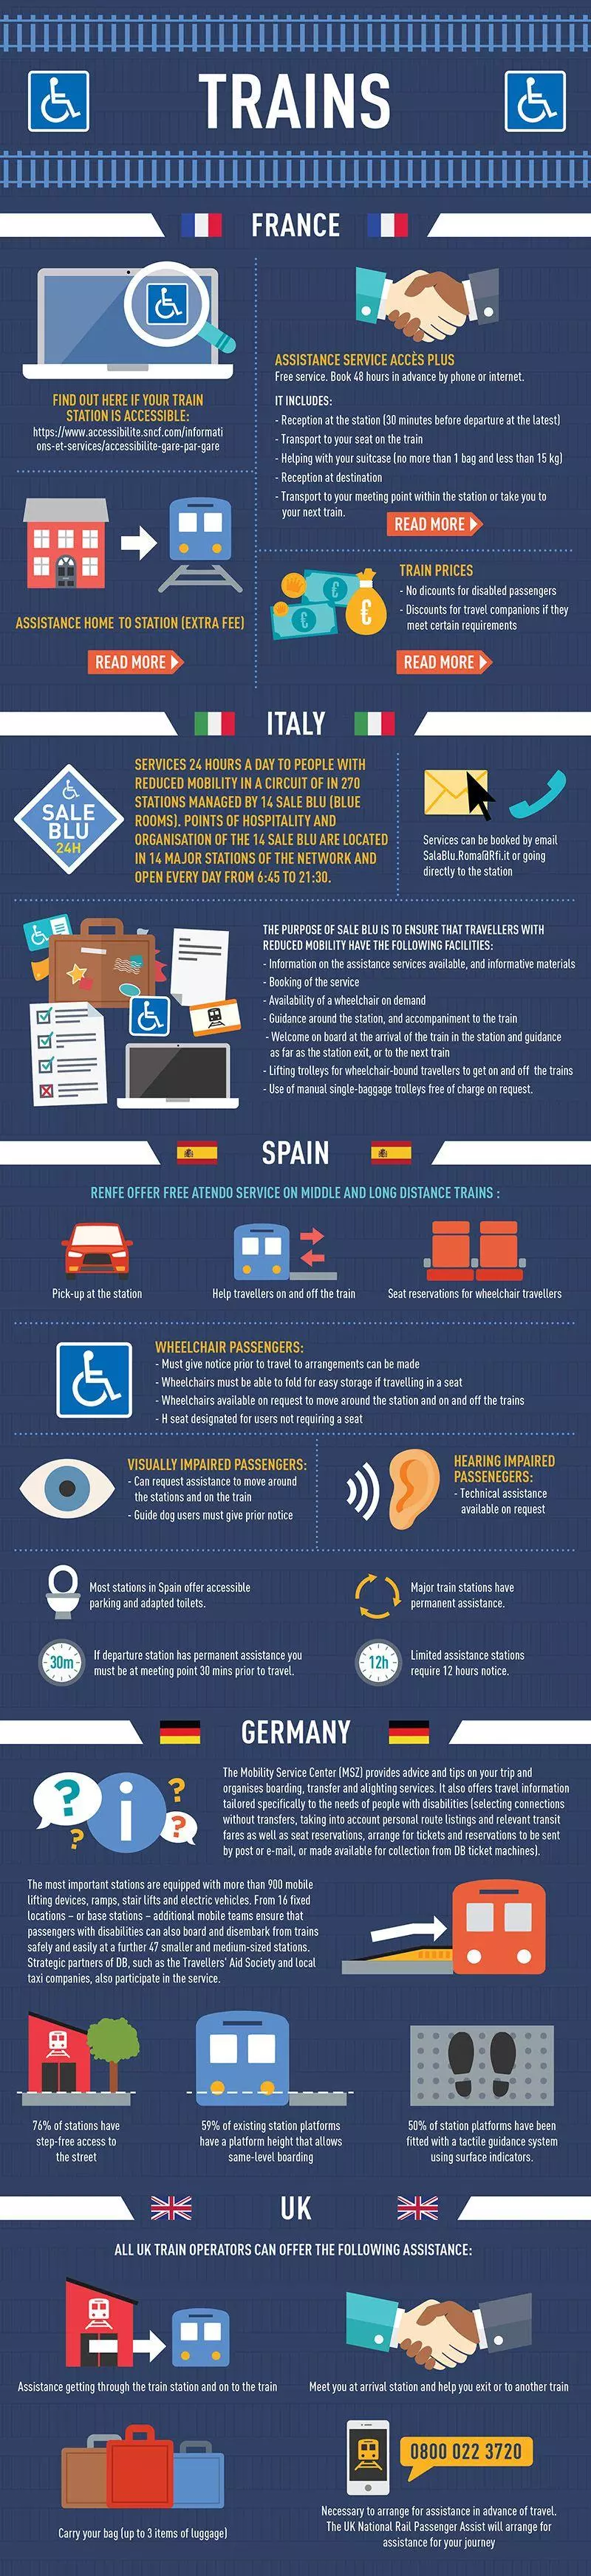 A Guide to Accessible Travel Infographic - Trains